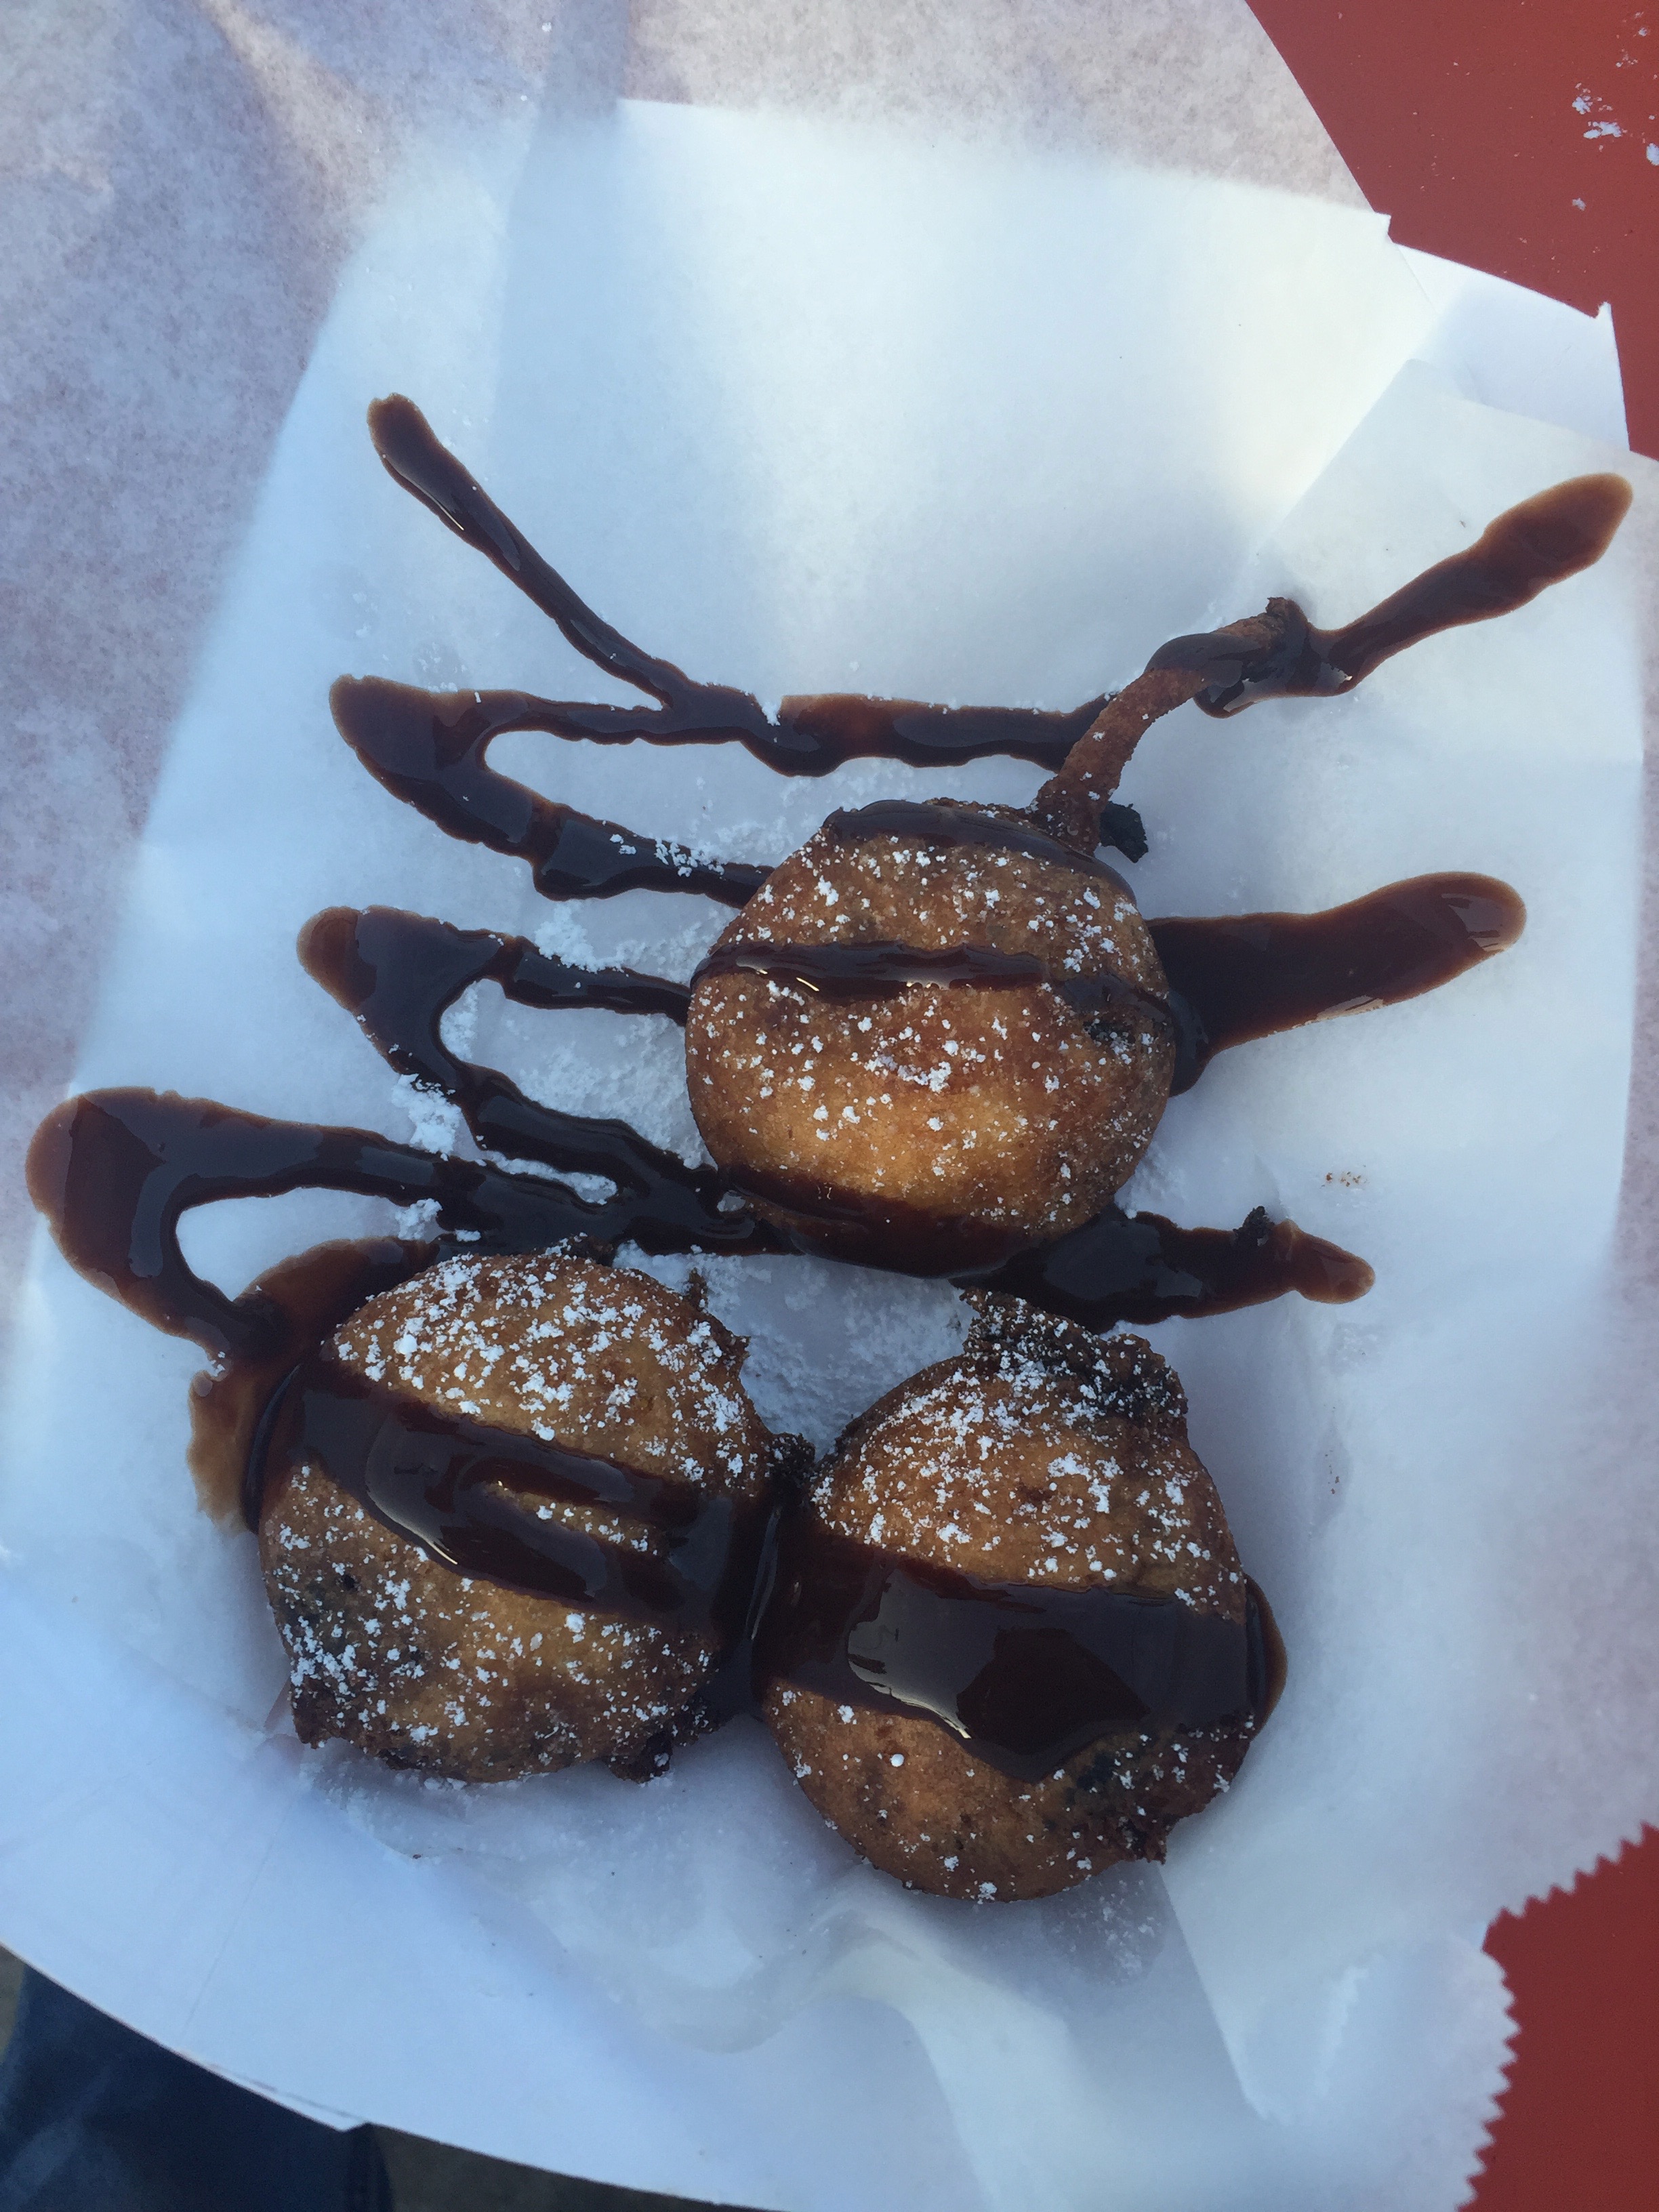 serving suggestion for deep fried oreos: lightly dusted with icing powder and drizzled in chocolate sauce